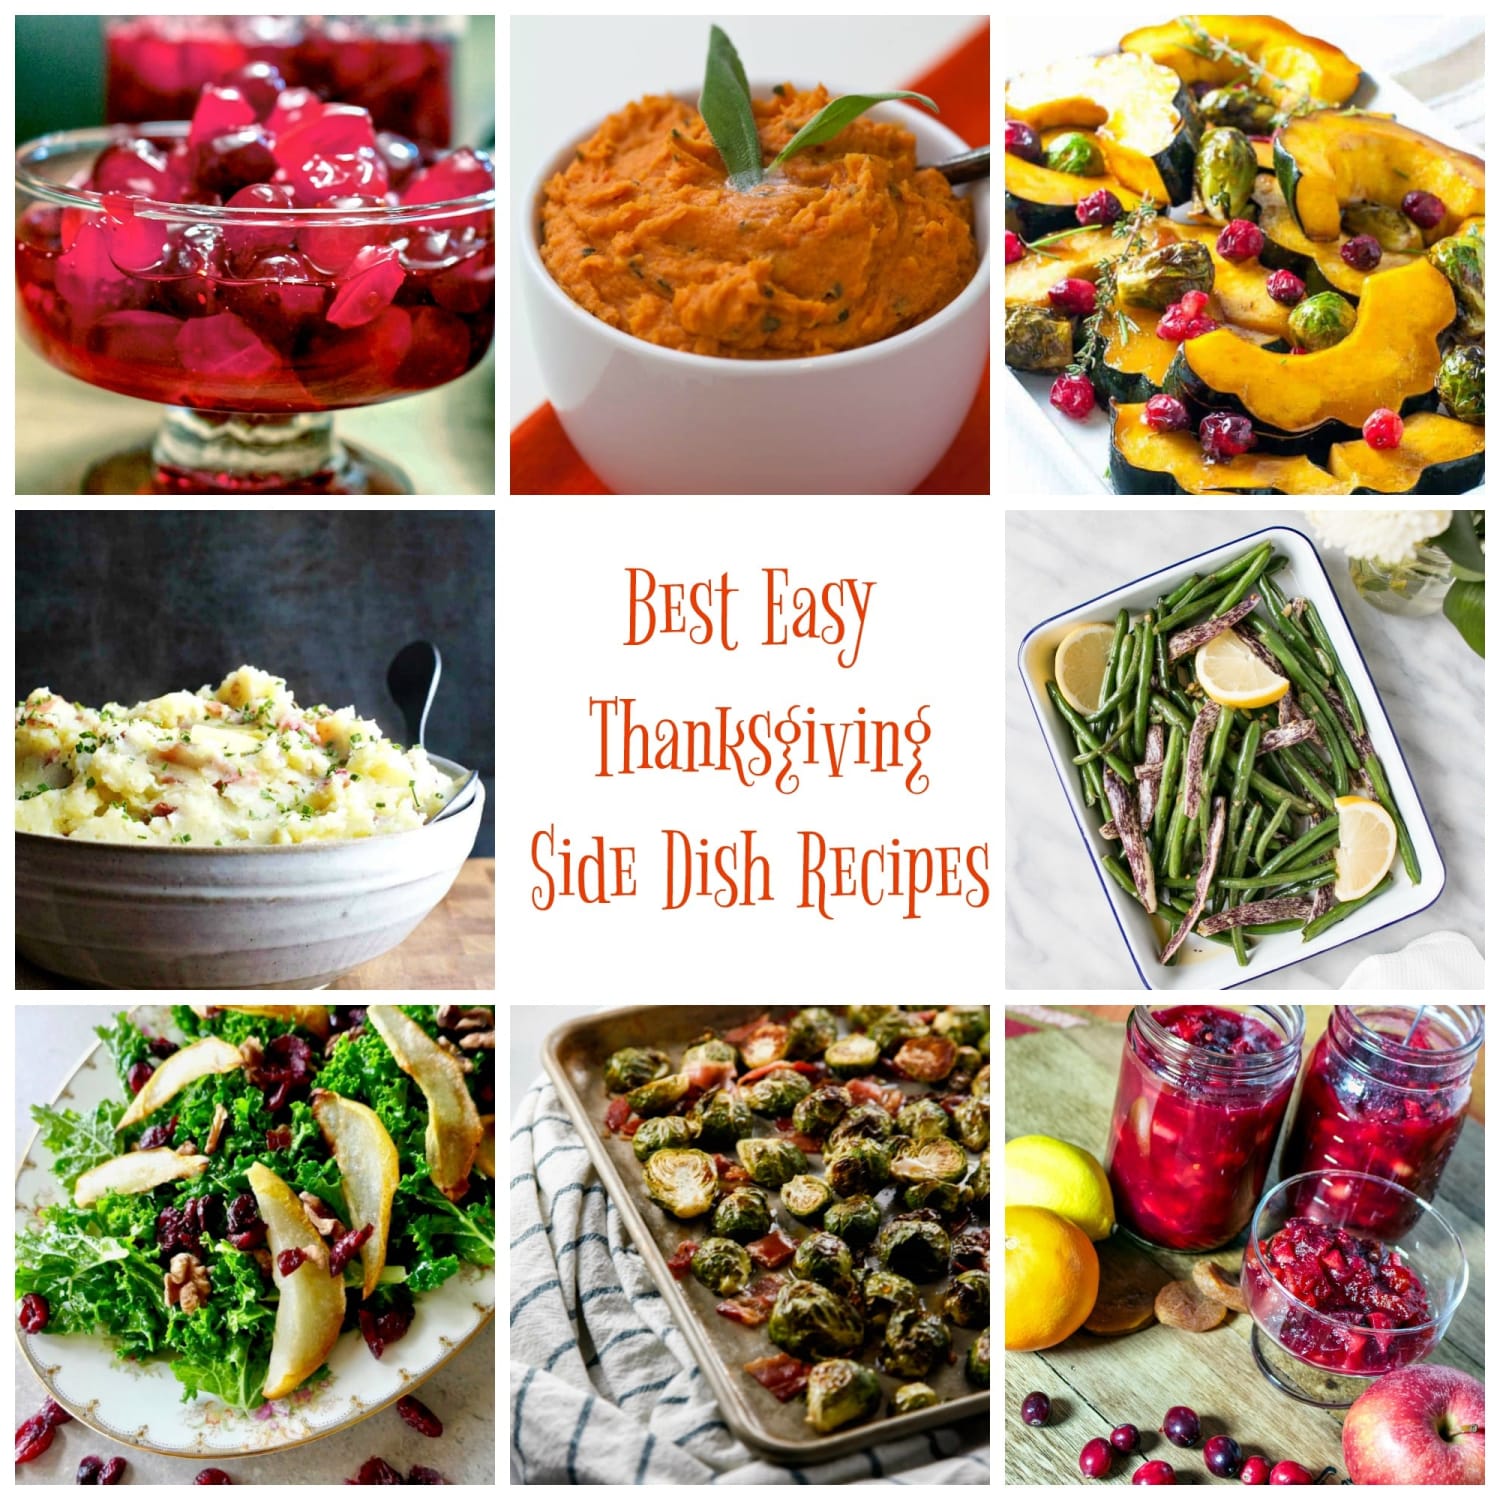 Best Easy Thanksgiving Side Dish Recipes